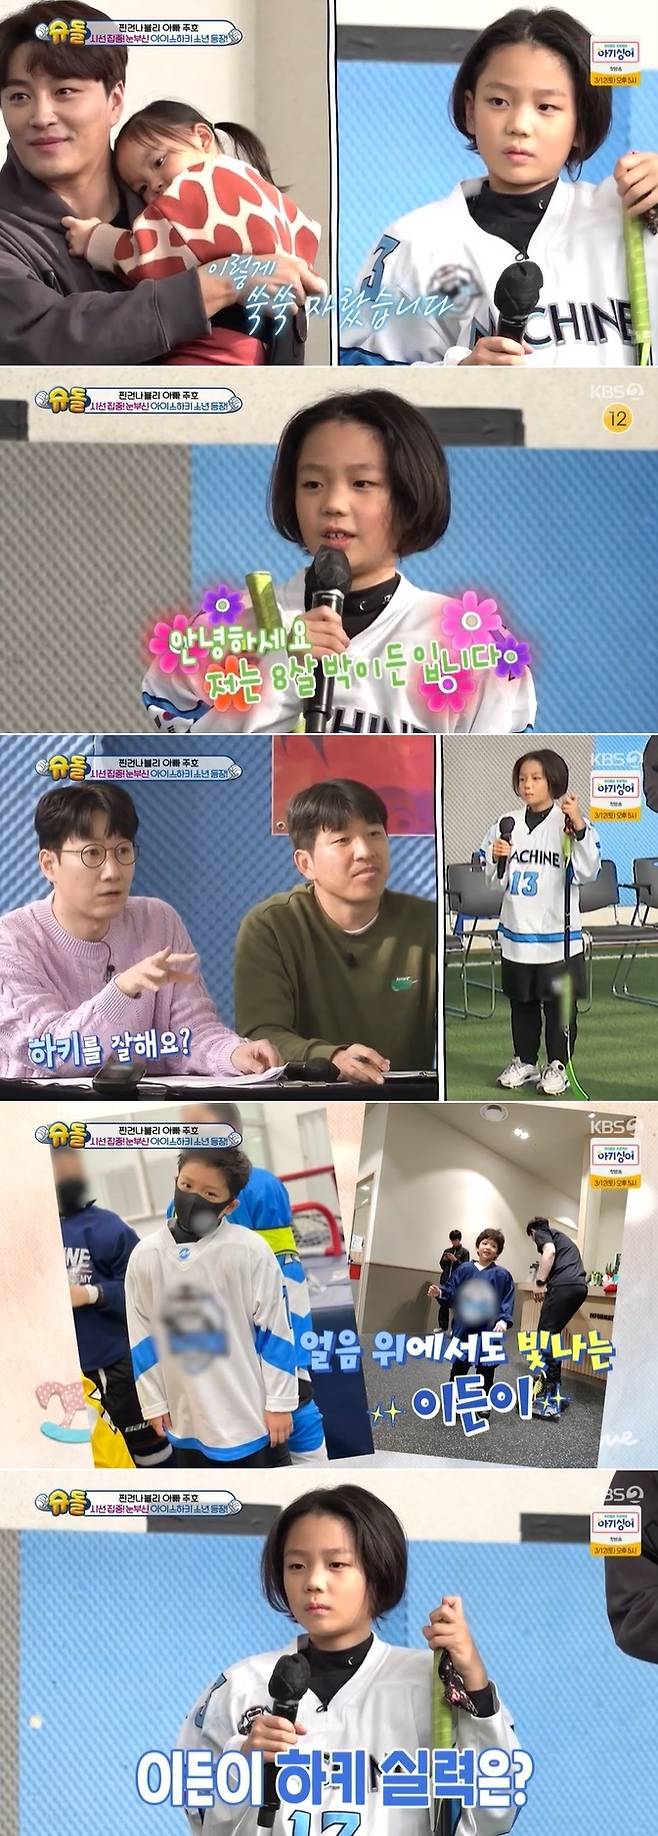 The recent situation of handsome son Eden, who resembles Min Woo Hyuk, has been revealed.On February 27th KBS 2TV The Return of Superman, Park Joo-ho founded Pachuho Little Football Team and recruited members.Children with various charms gathered together to join the soccer team.On the same day, Min Woo Hyuks son Park, and daughter Park I-eum appeared; Eden, who turned 8 this year, drew attention with her sobs.So Yoo-jin, who saw Eden in ice hockey costume, admired it as too cool.